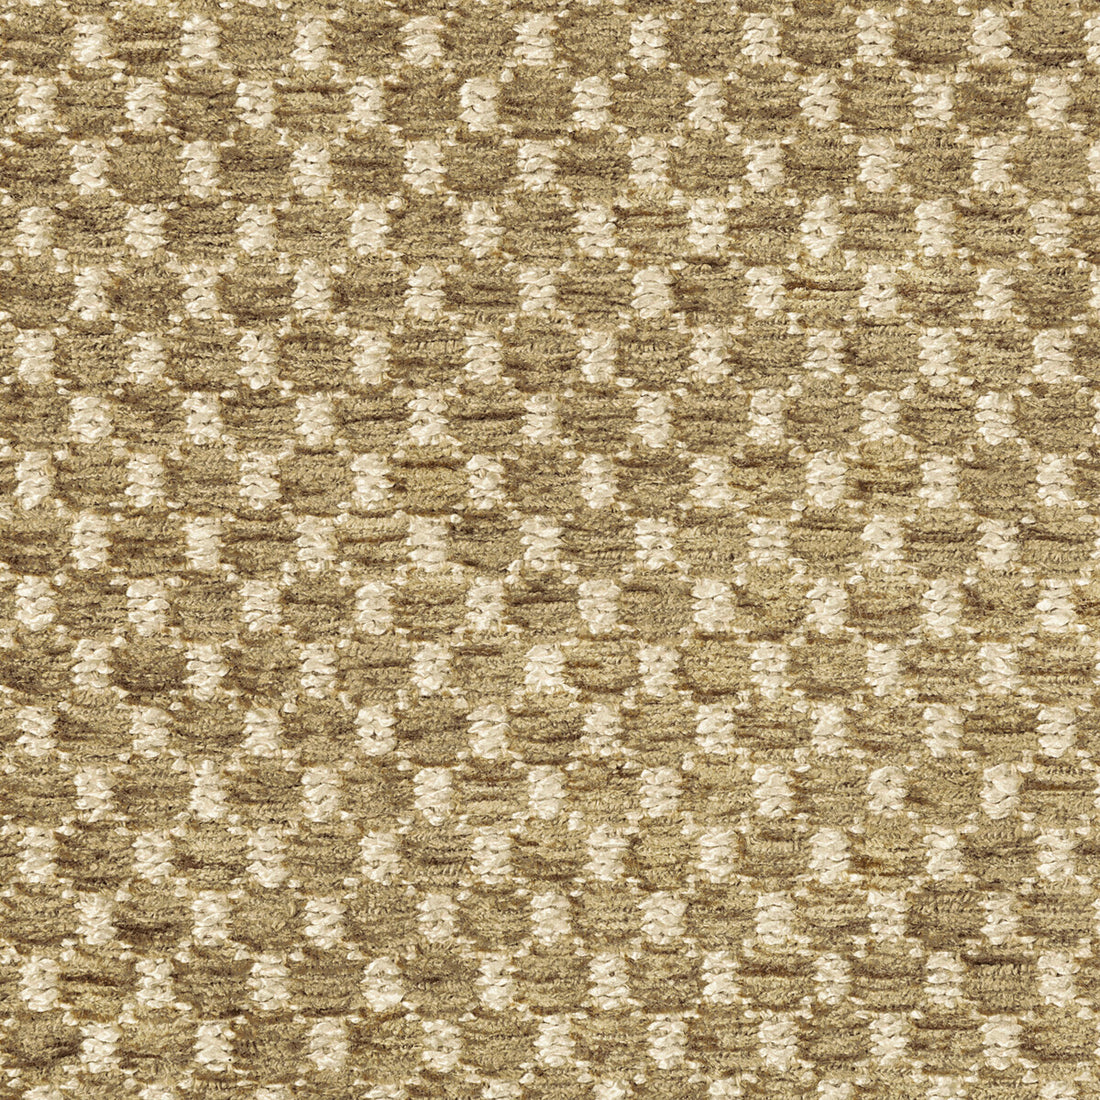 Ecrins Texture fabric in beige color - pattern 8019147.16.0 - by Brunschwig &amp; Fils in the Chambery Textures II collection